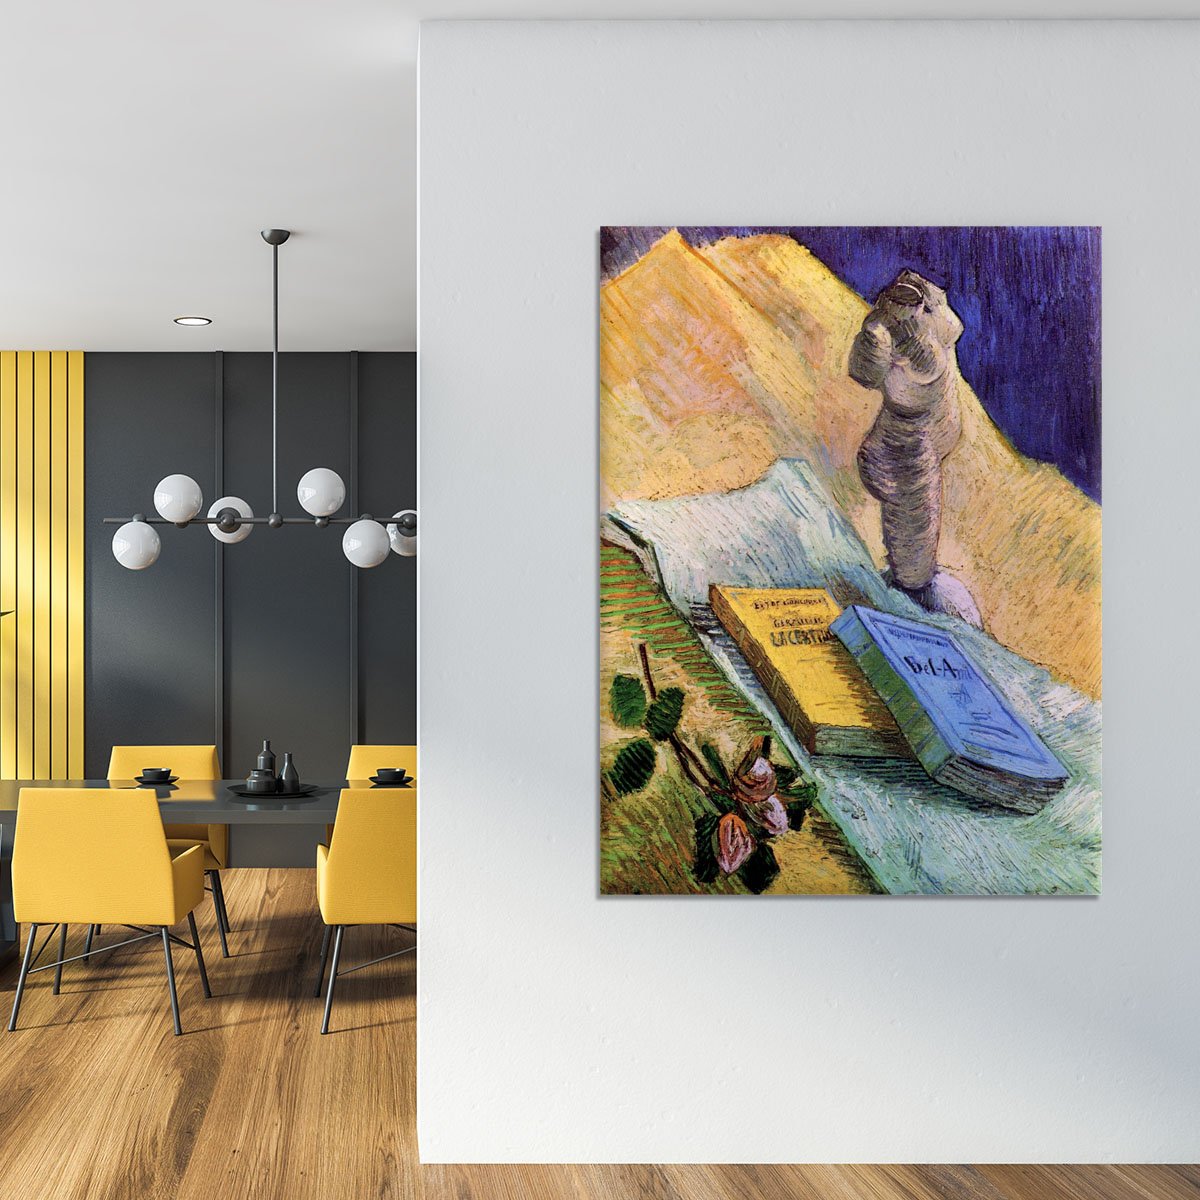 Still Life with Plaster Statuette a Rose and Two Novels by Van Gogh Canvas Print or Poster